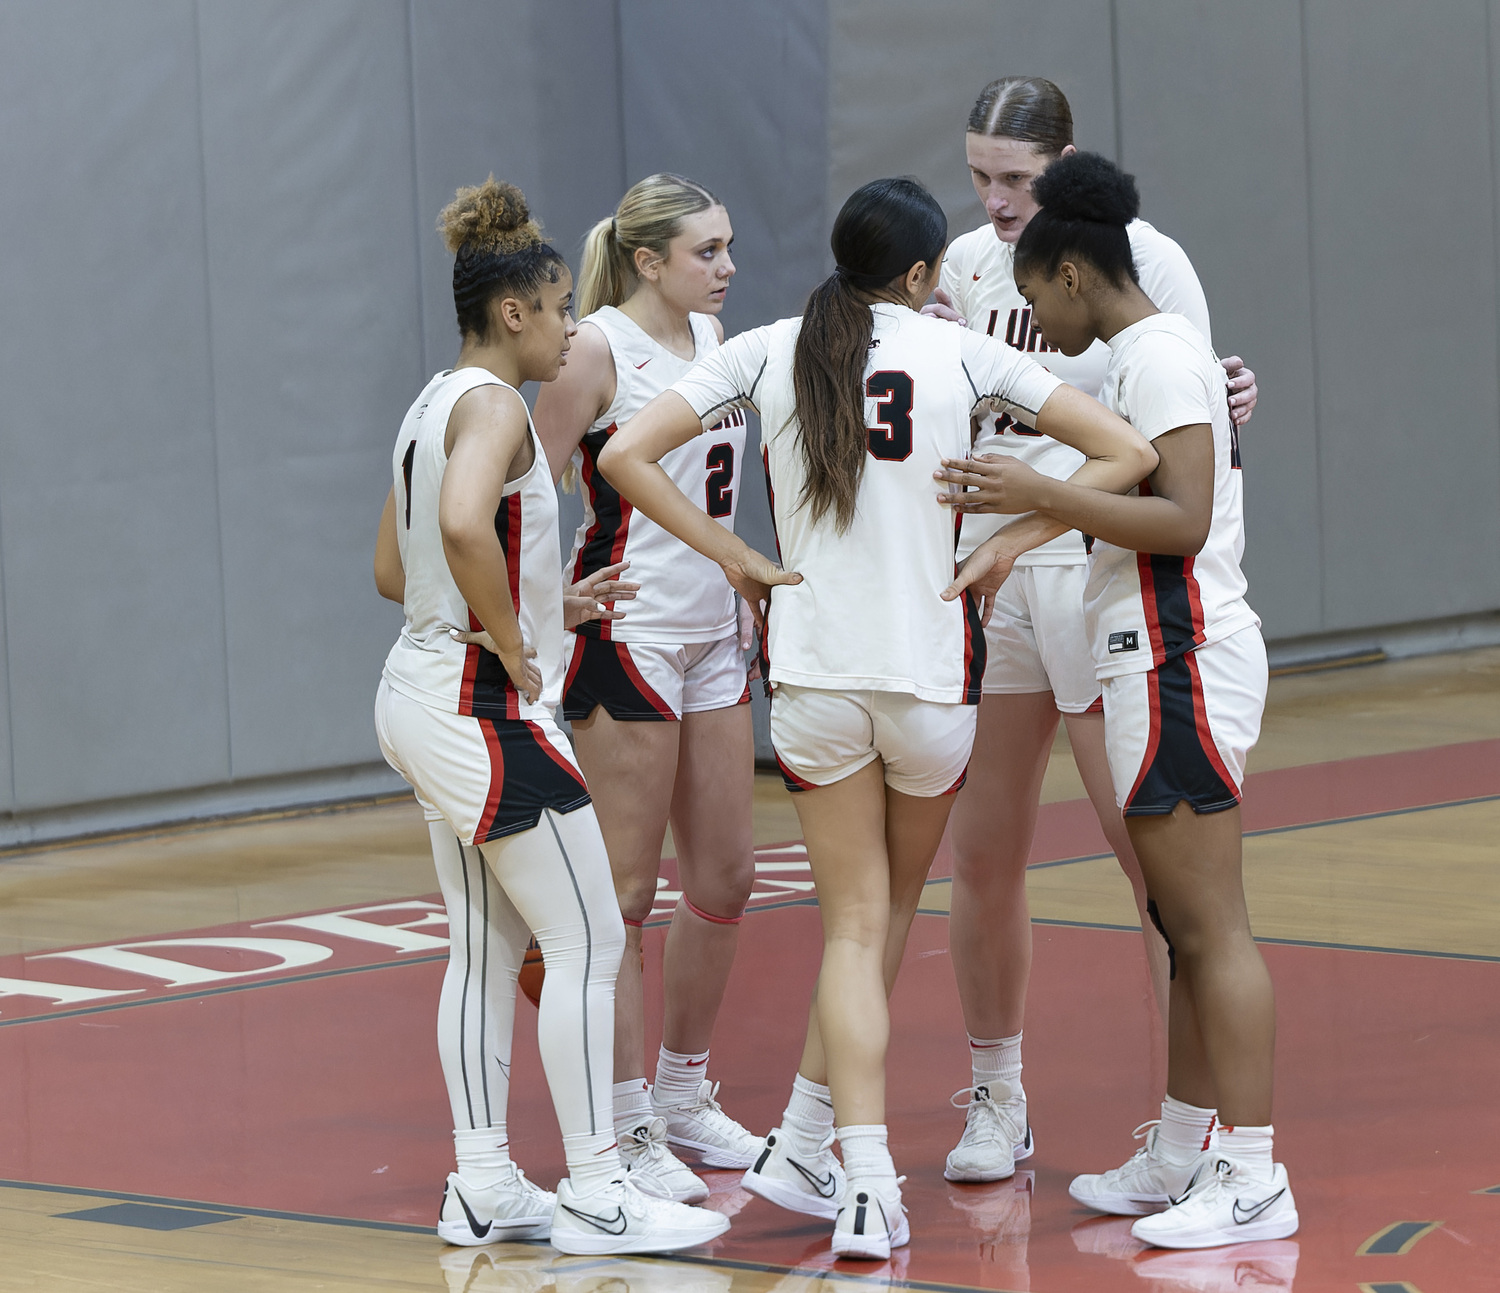 Sag Harbor resident Coco Lohmiller (#2) in action with the LuHi girls basketball team, which has been the top-ranked team in the nation for most of the season. M. FIDEL PHOTOGRAPHY